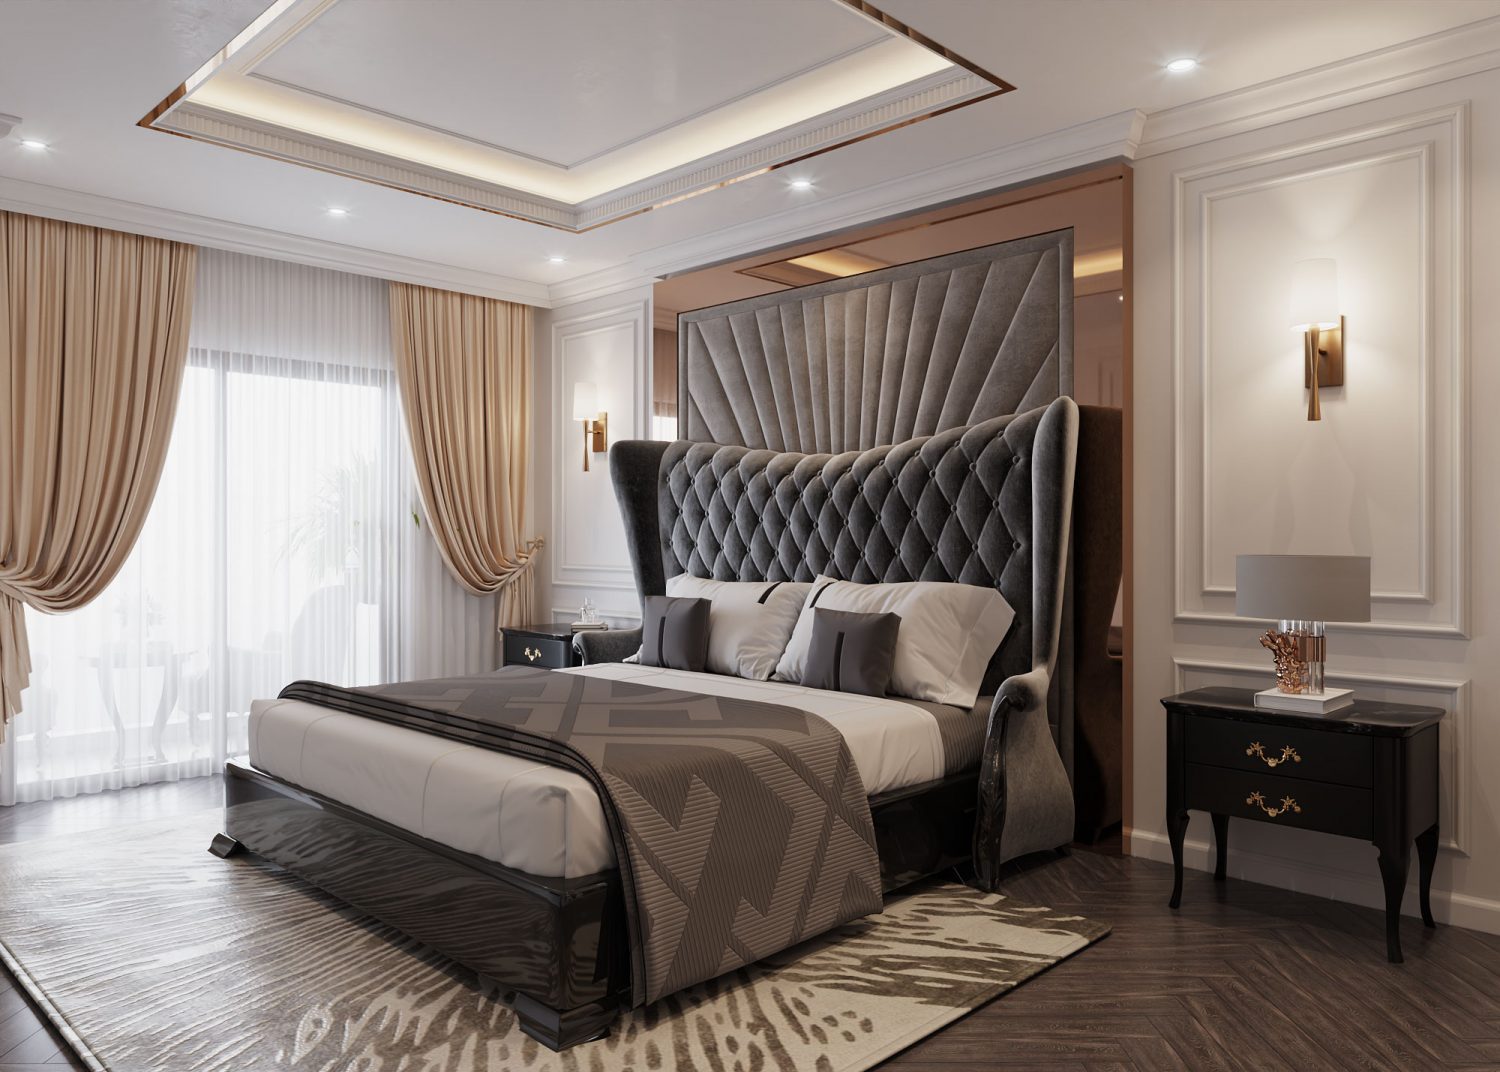 13408. Download Free 3D Master Bedroom Interior Model by Le Tien Dung ...